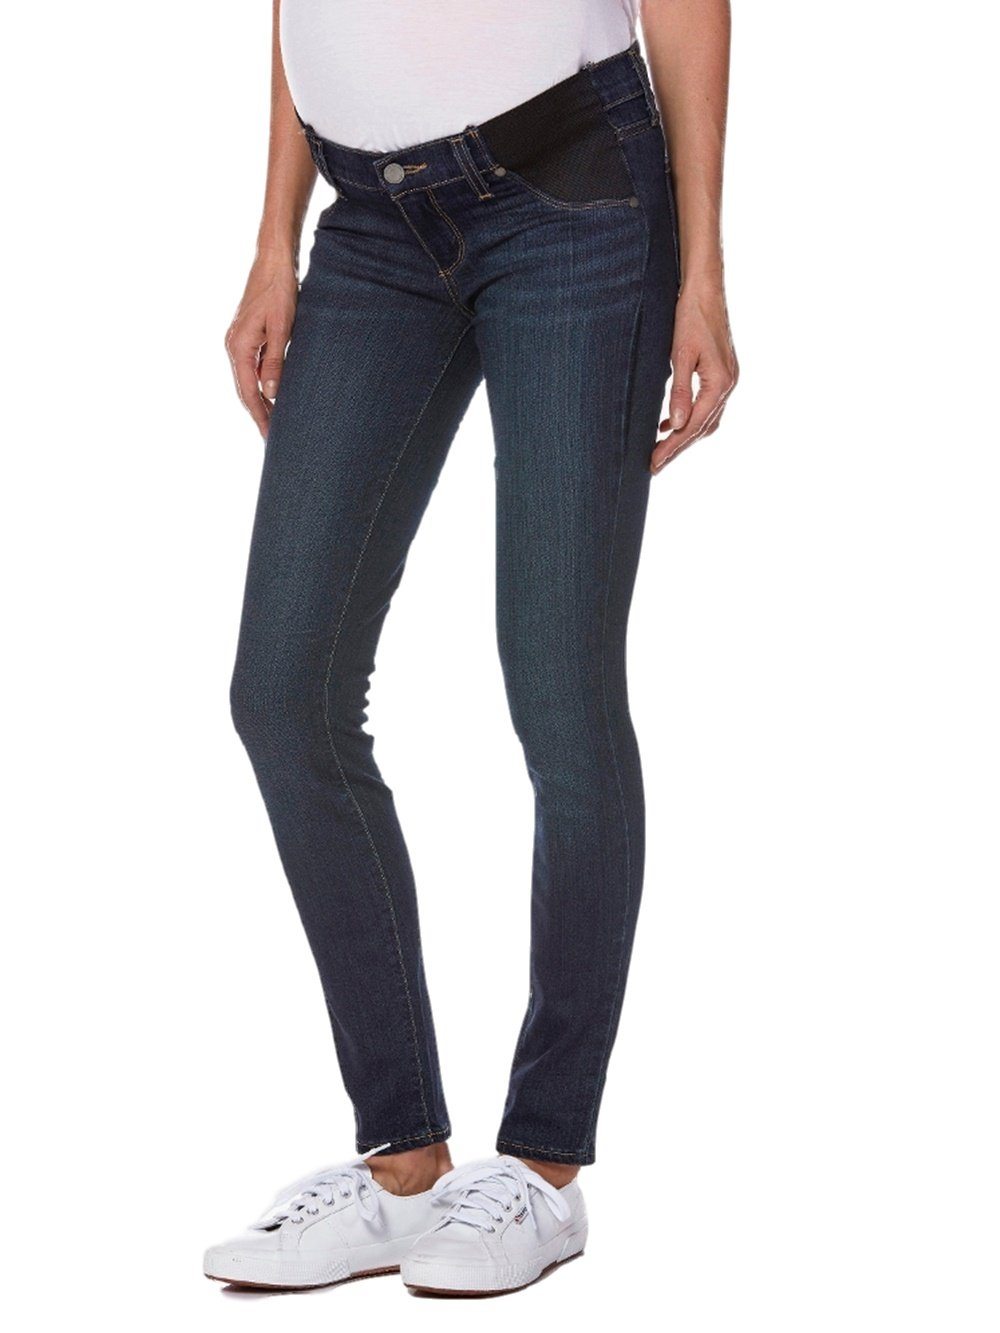 super soft comfy skinny under the belly jeans with side panels